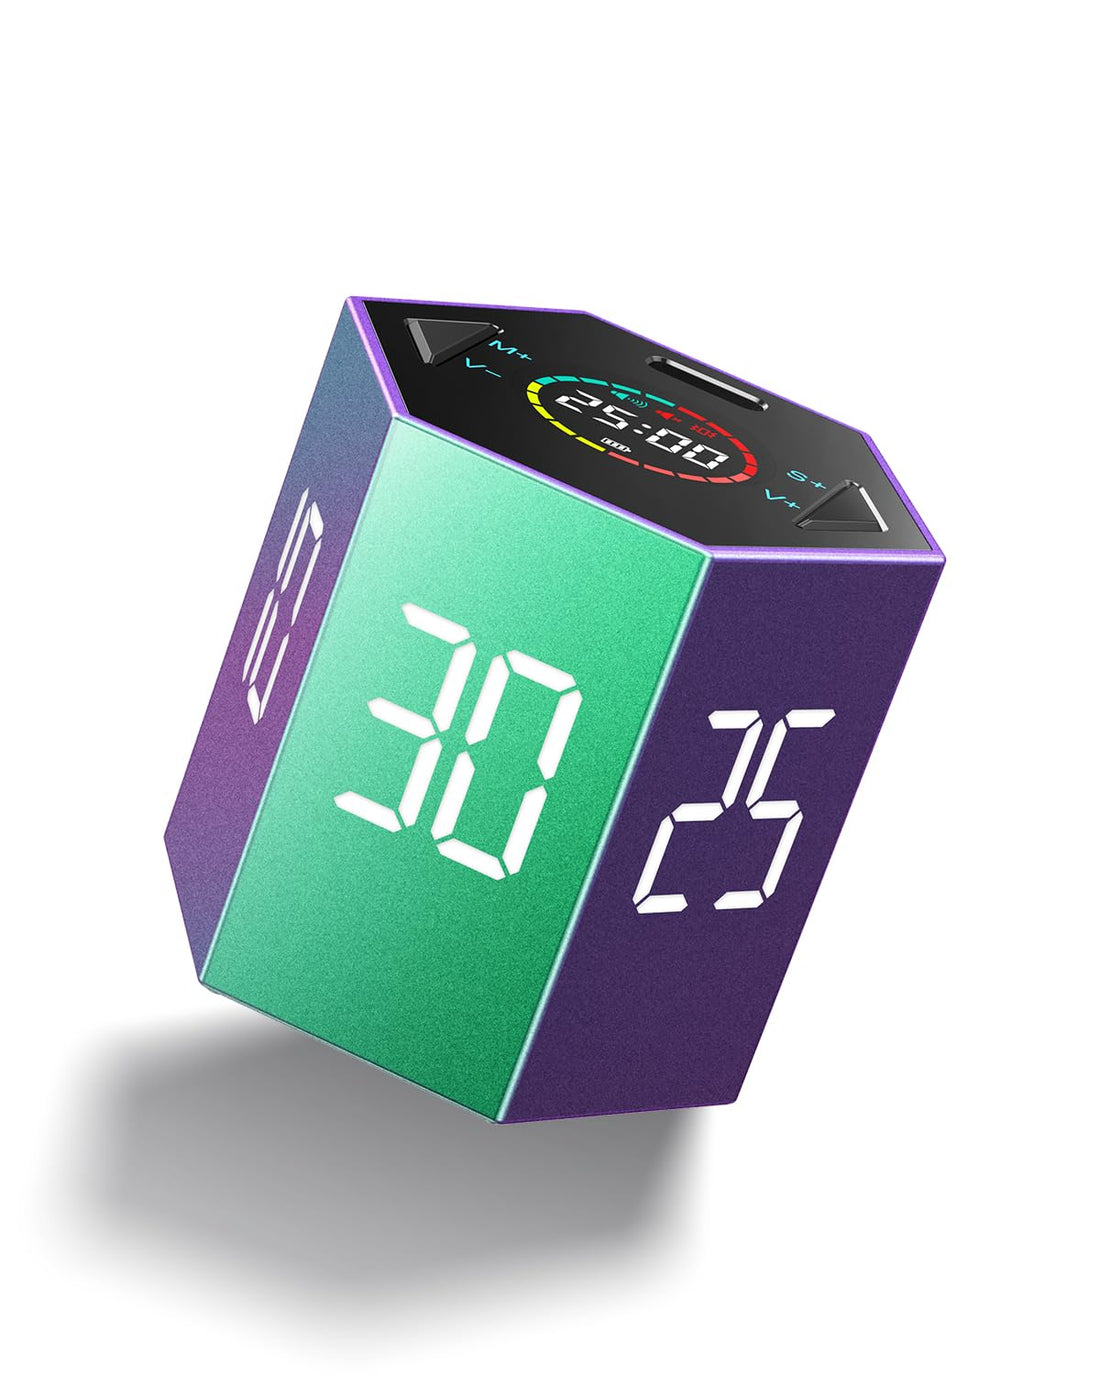 Ticktime Pro Pomodoro Timer, Productivity Cube Timer, Magnetic Flip Timer, Pause & Resume, Mute, Vibrate & Adjustable Sound Alert, for Task, Work, ADHD, 3/5/10/15/25/30min & Custom Countdown,Purple